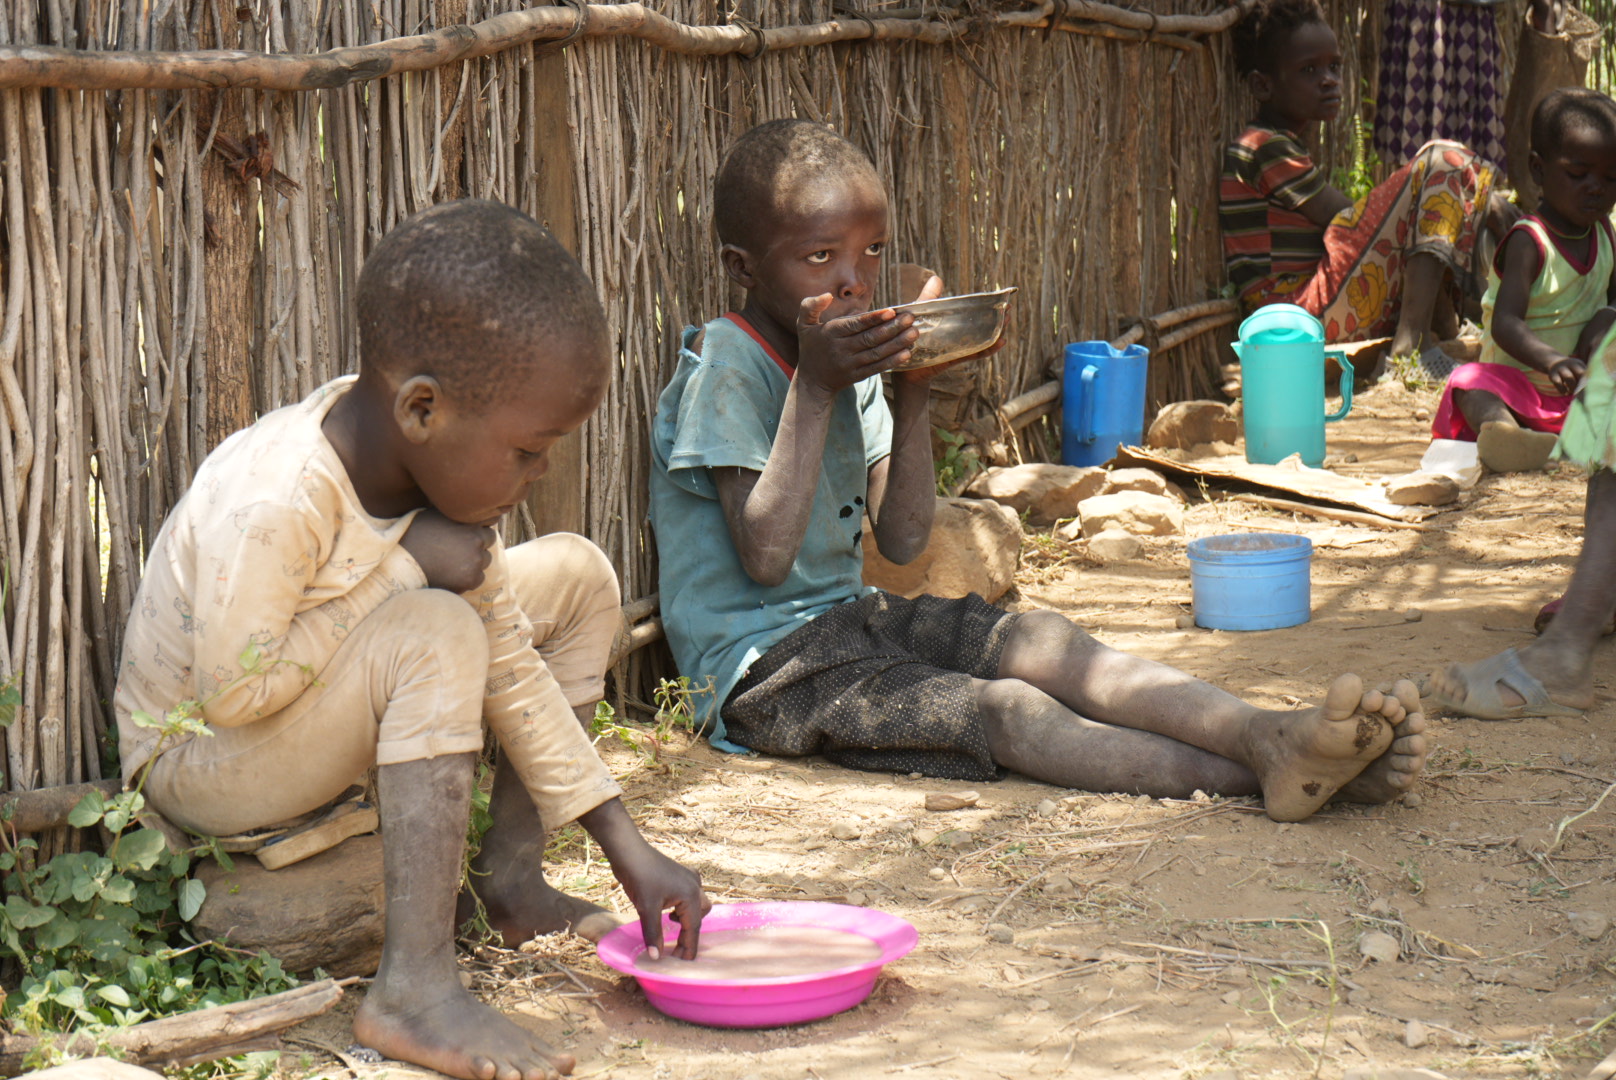 Children eat porridge as they seek refuge from the scorching sun at the Incarnate Word Sisters' compound in Rotu village. High levels of poverty, insecurity, and the ongoing drought have resulted in widespread food insecurity for most families. The missionary sisters provide porridge to the children each morning to help ease the pressure of hunger in East Pokot's families. (GSR photo/Wycliff Peter Oundo)